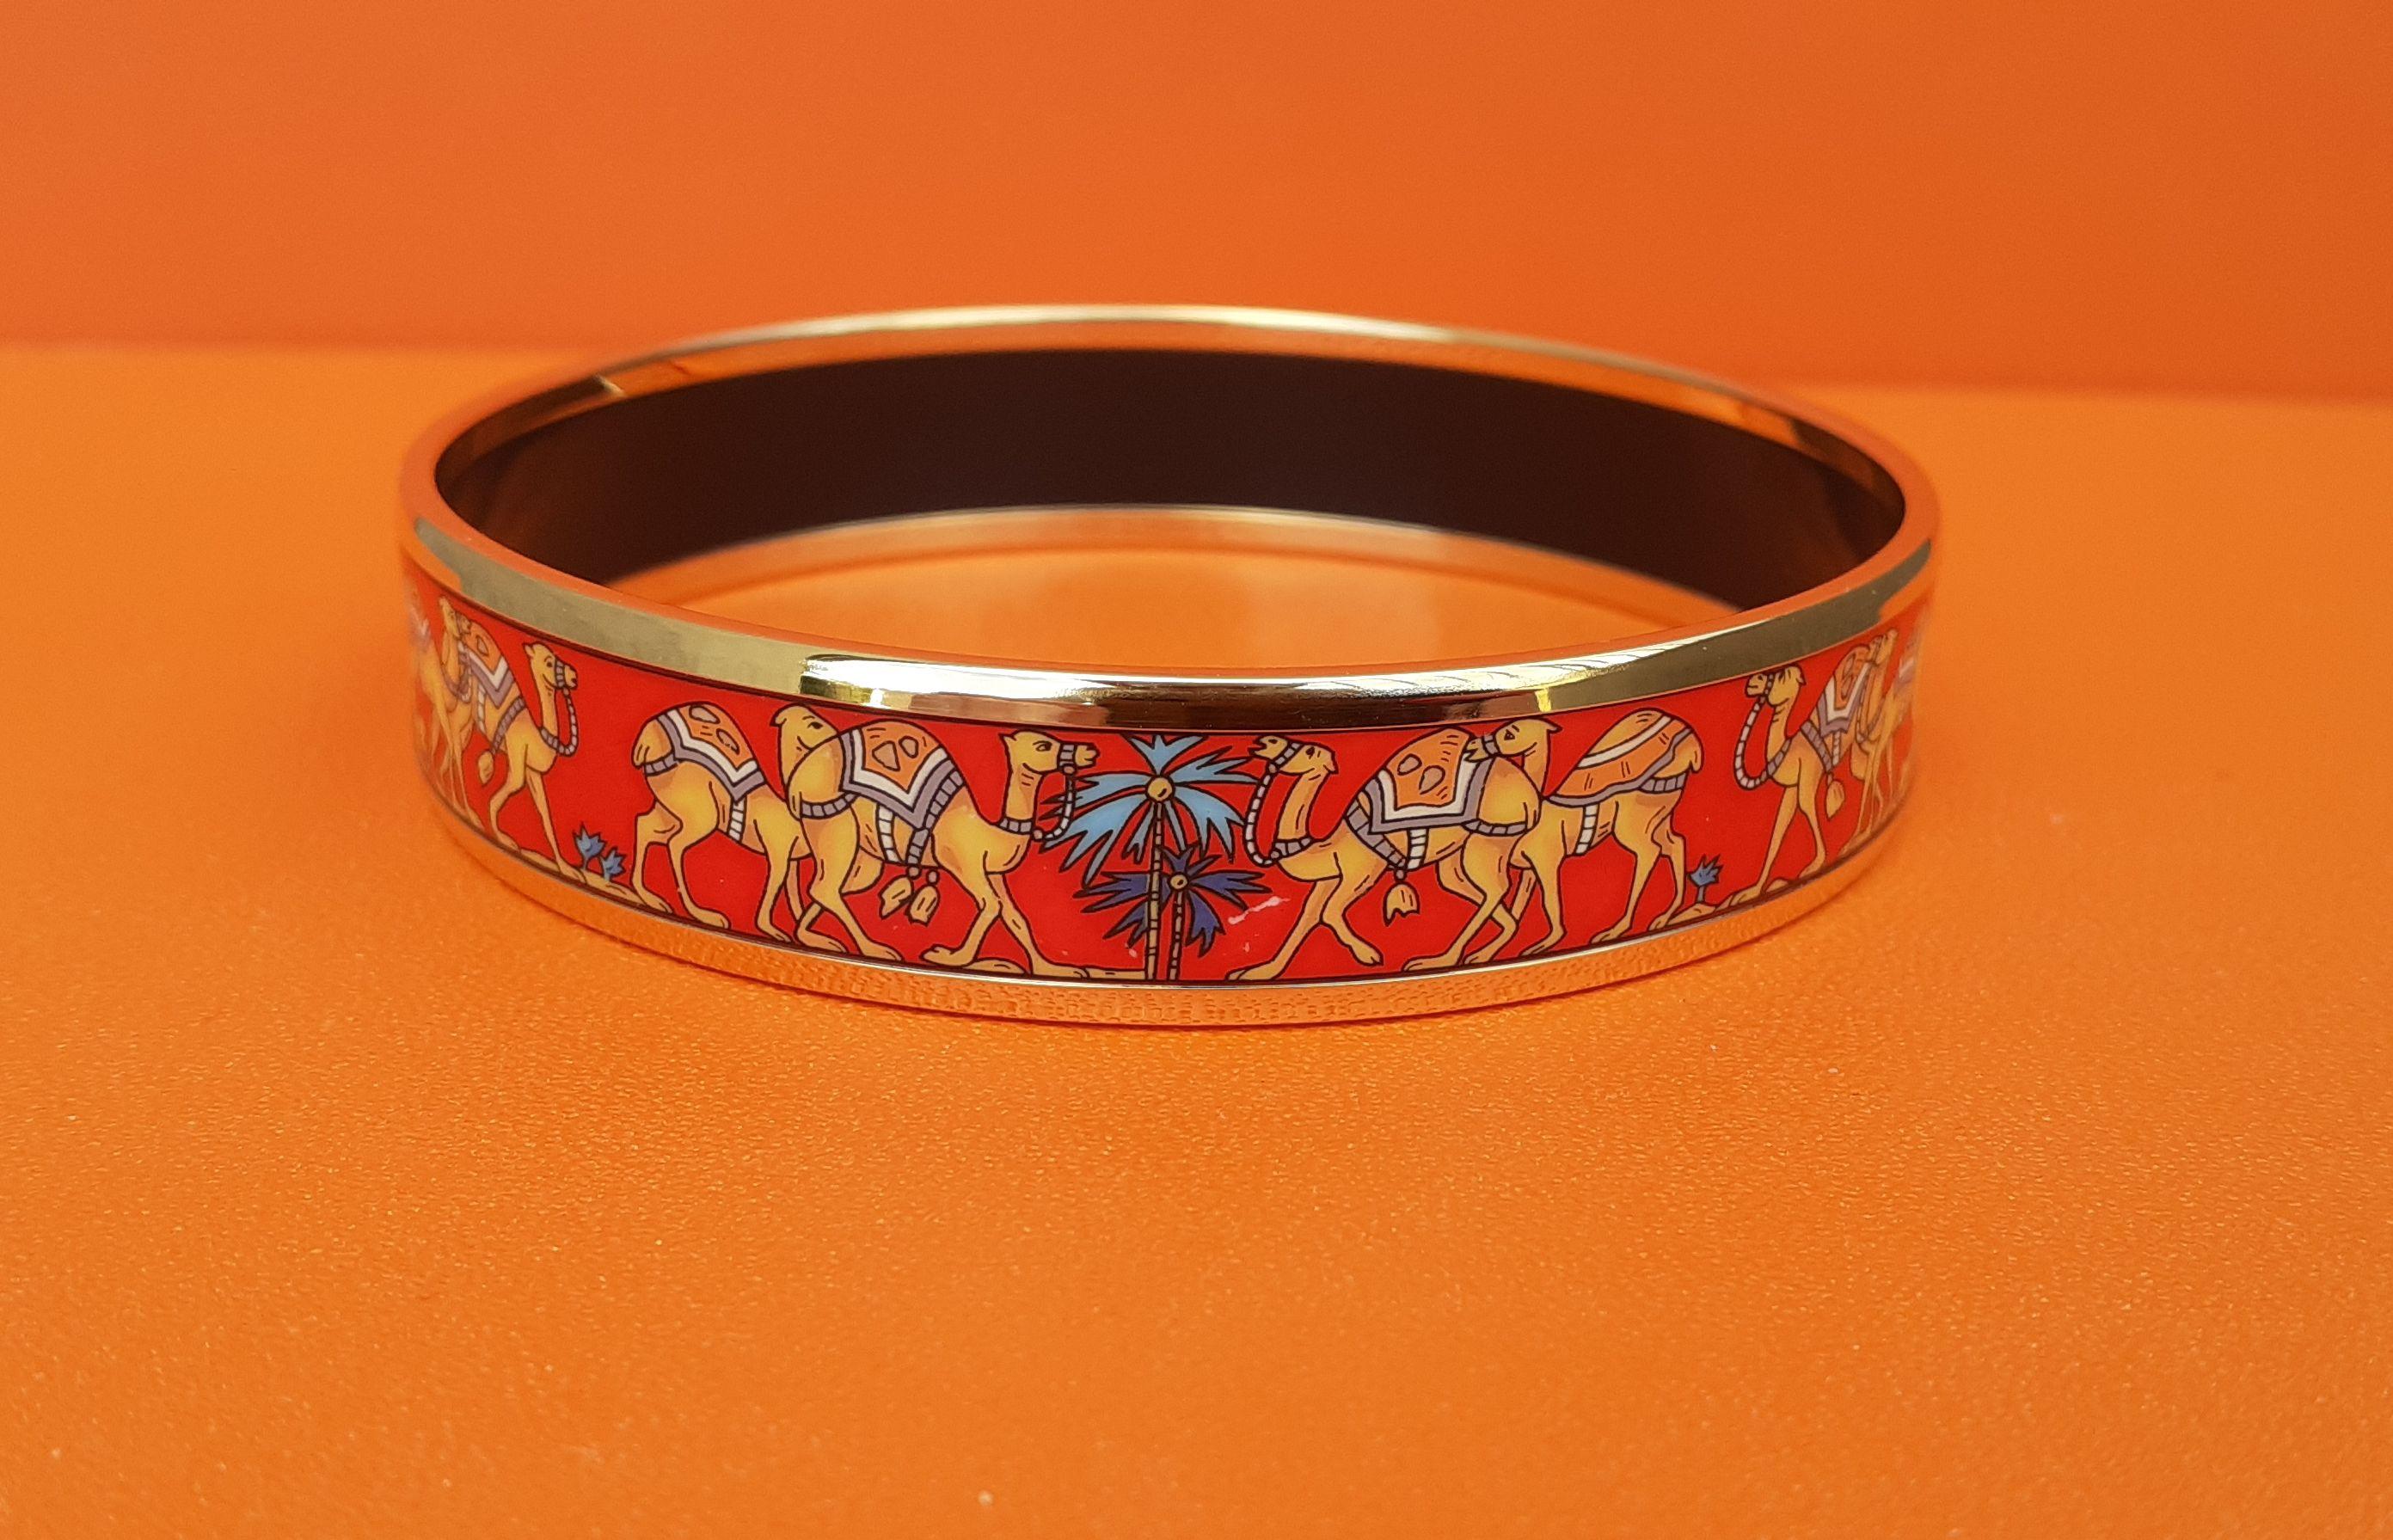 Beautiful and RARE Authentic Hermès Bracelet

Print: Camels and Palm Trees

Hard to find !

Made in Austria + E (2001)

Made of printed enamel and NEW gold plated hardware

Colorways: Red, Yellow, Blue

